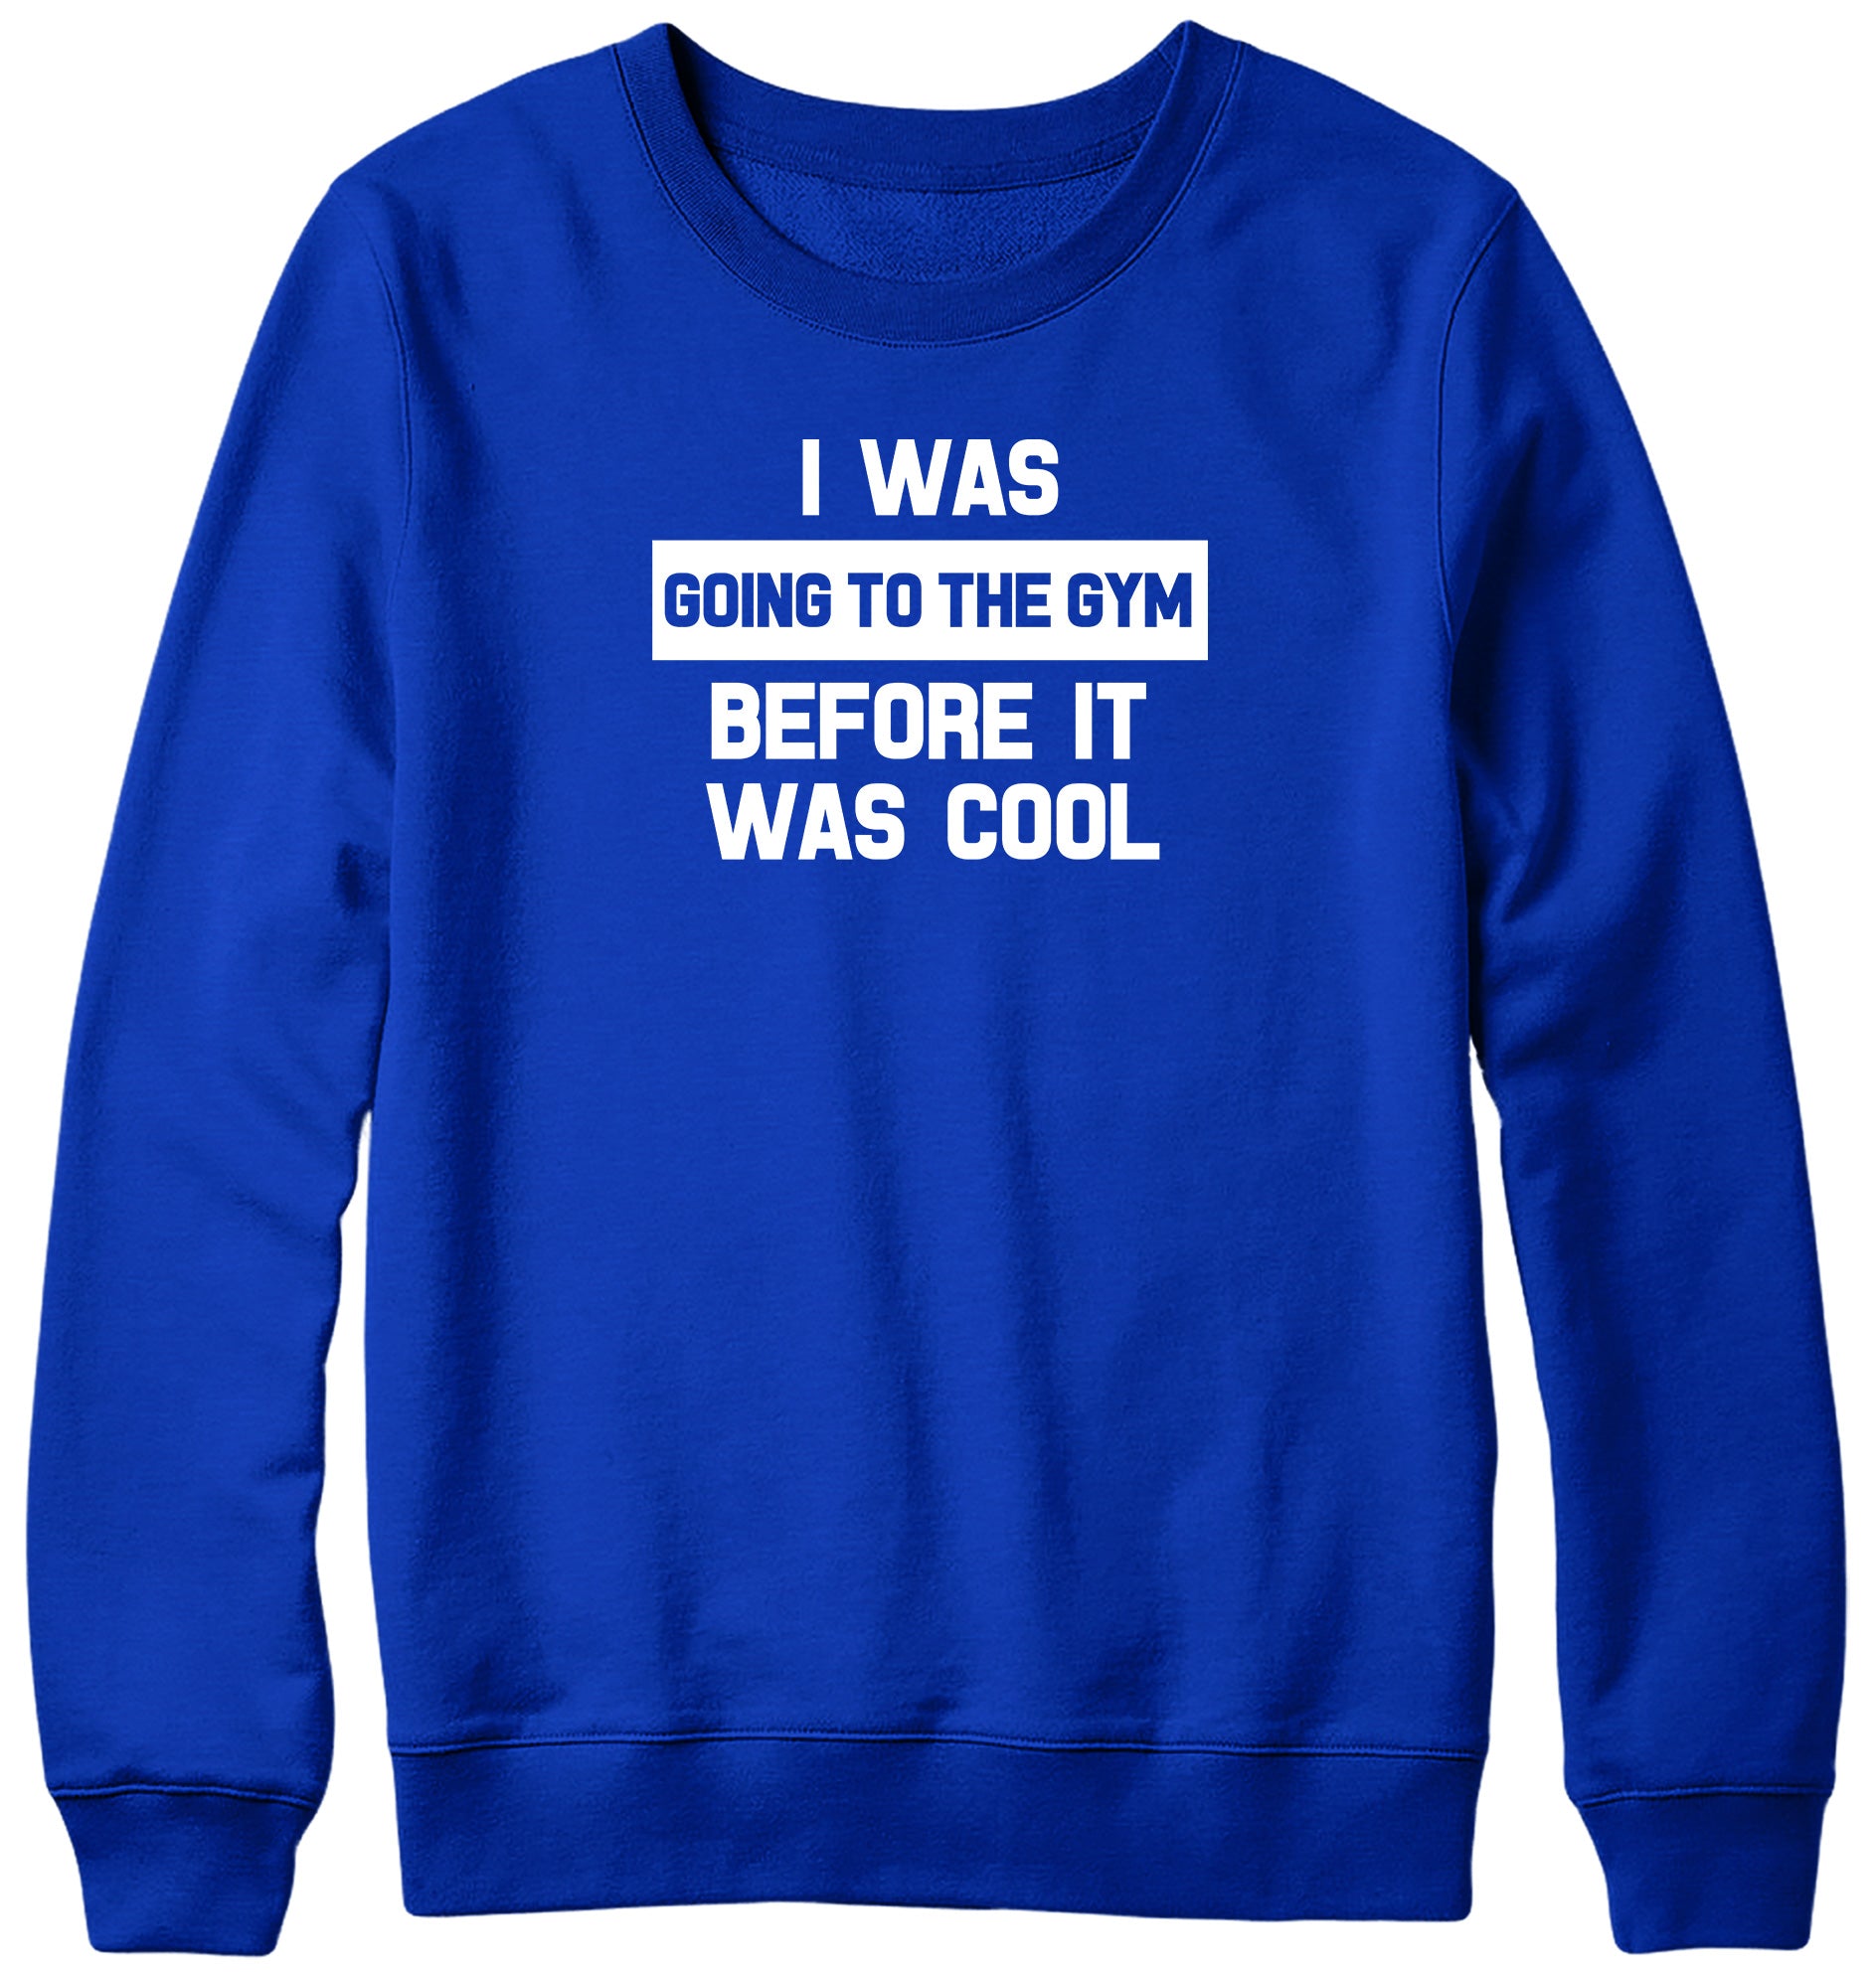 I WAS GOING TO THE GYM BEFORE IT WAS COOL WOMENS LADIES MENS UNISEX SWEATSHIRT